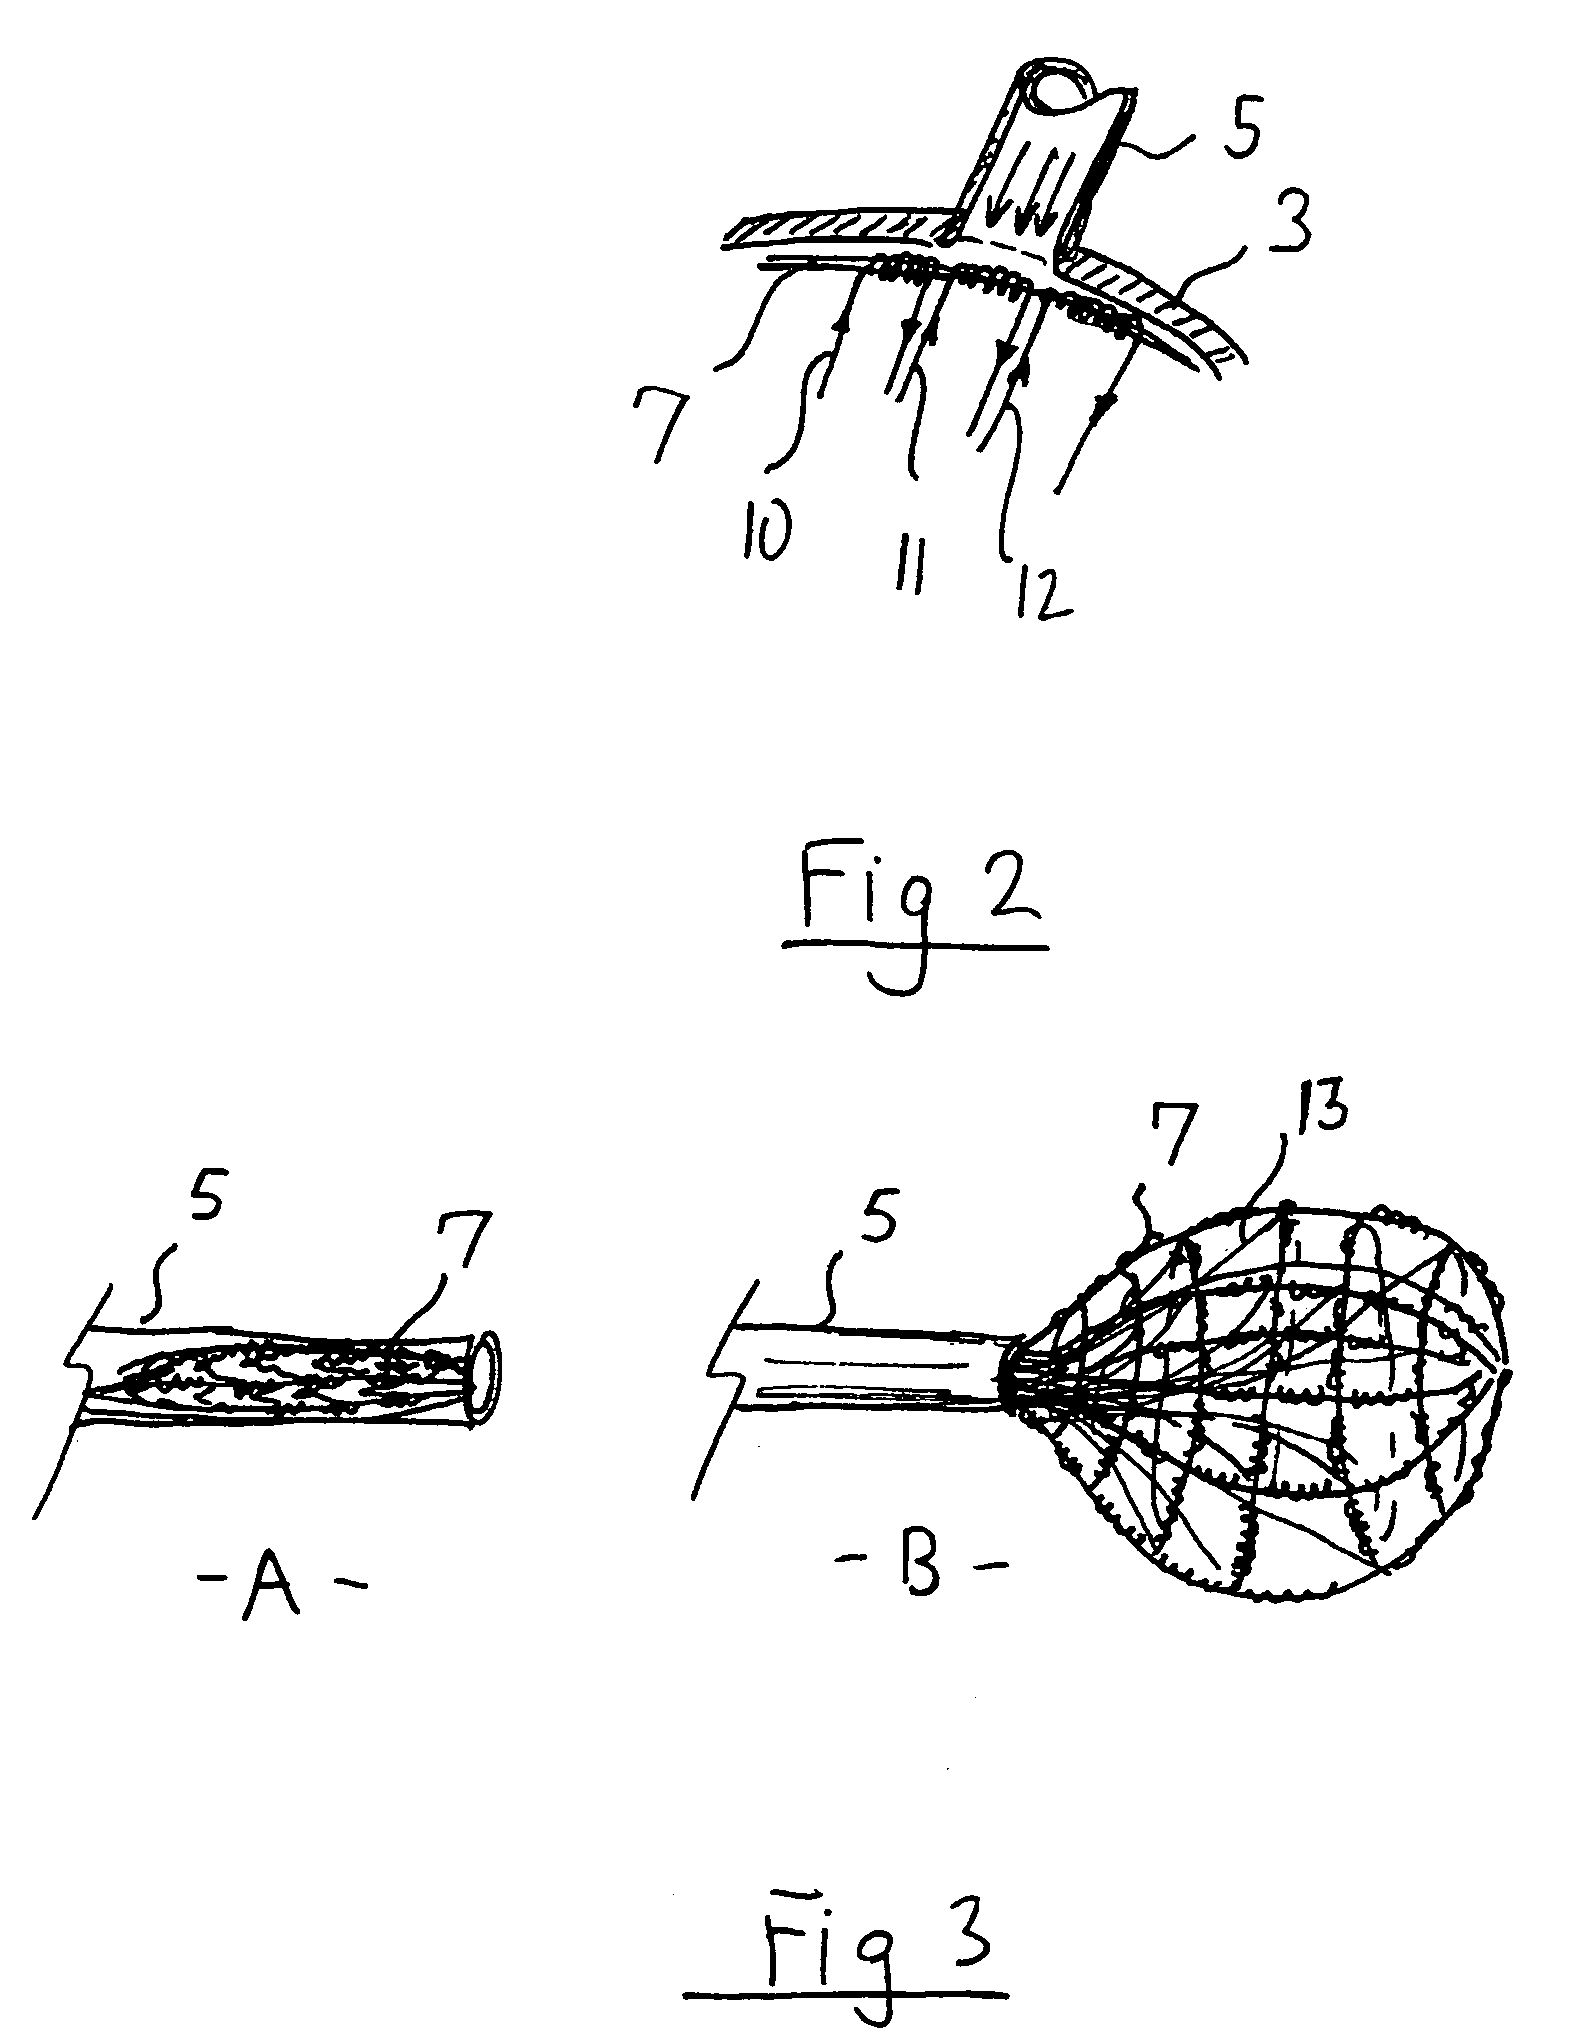 Intra-cardiac mapping and ablation method